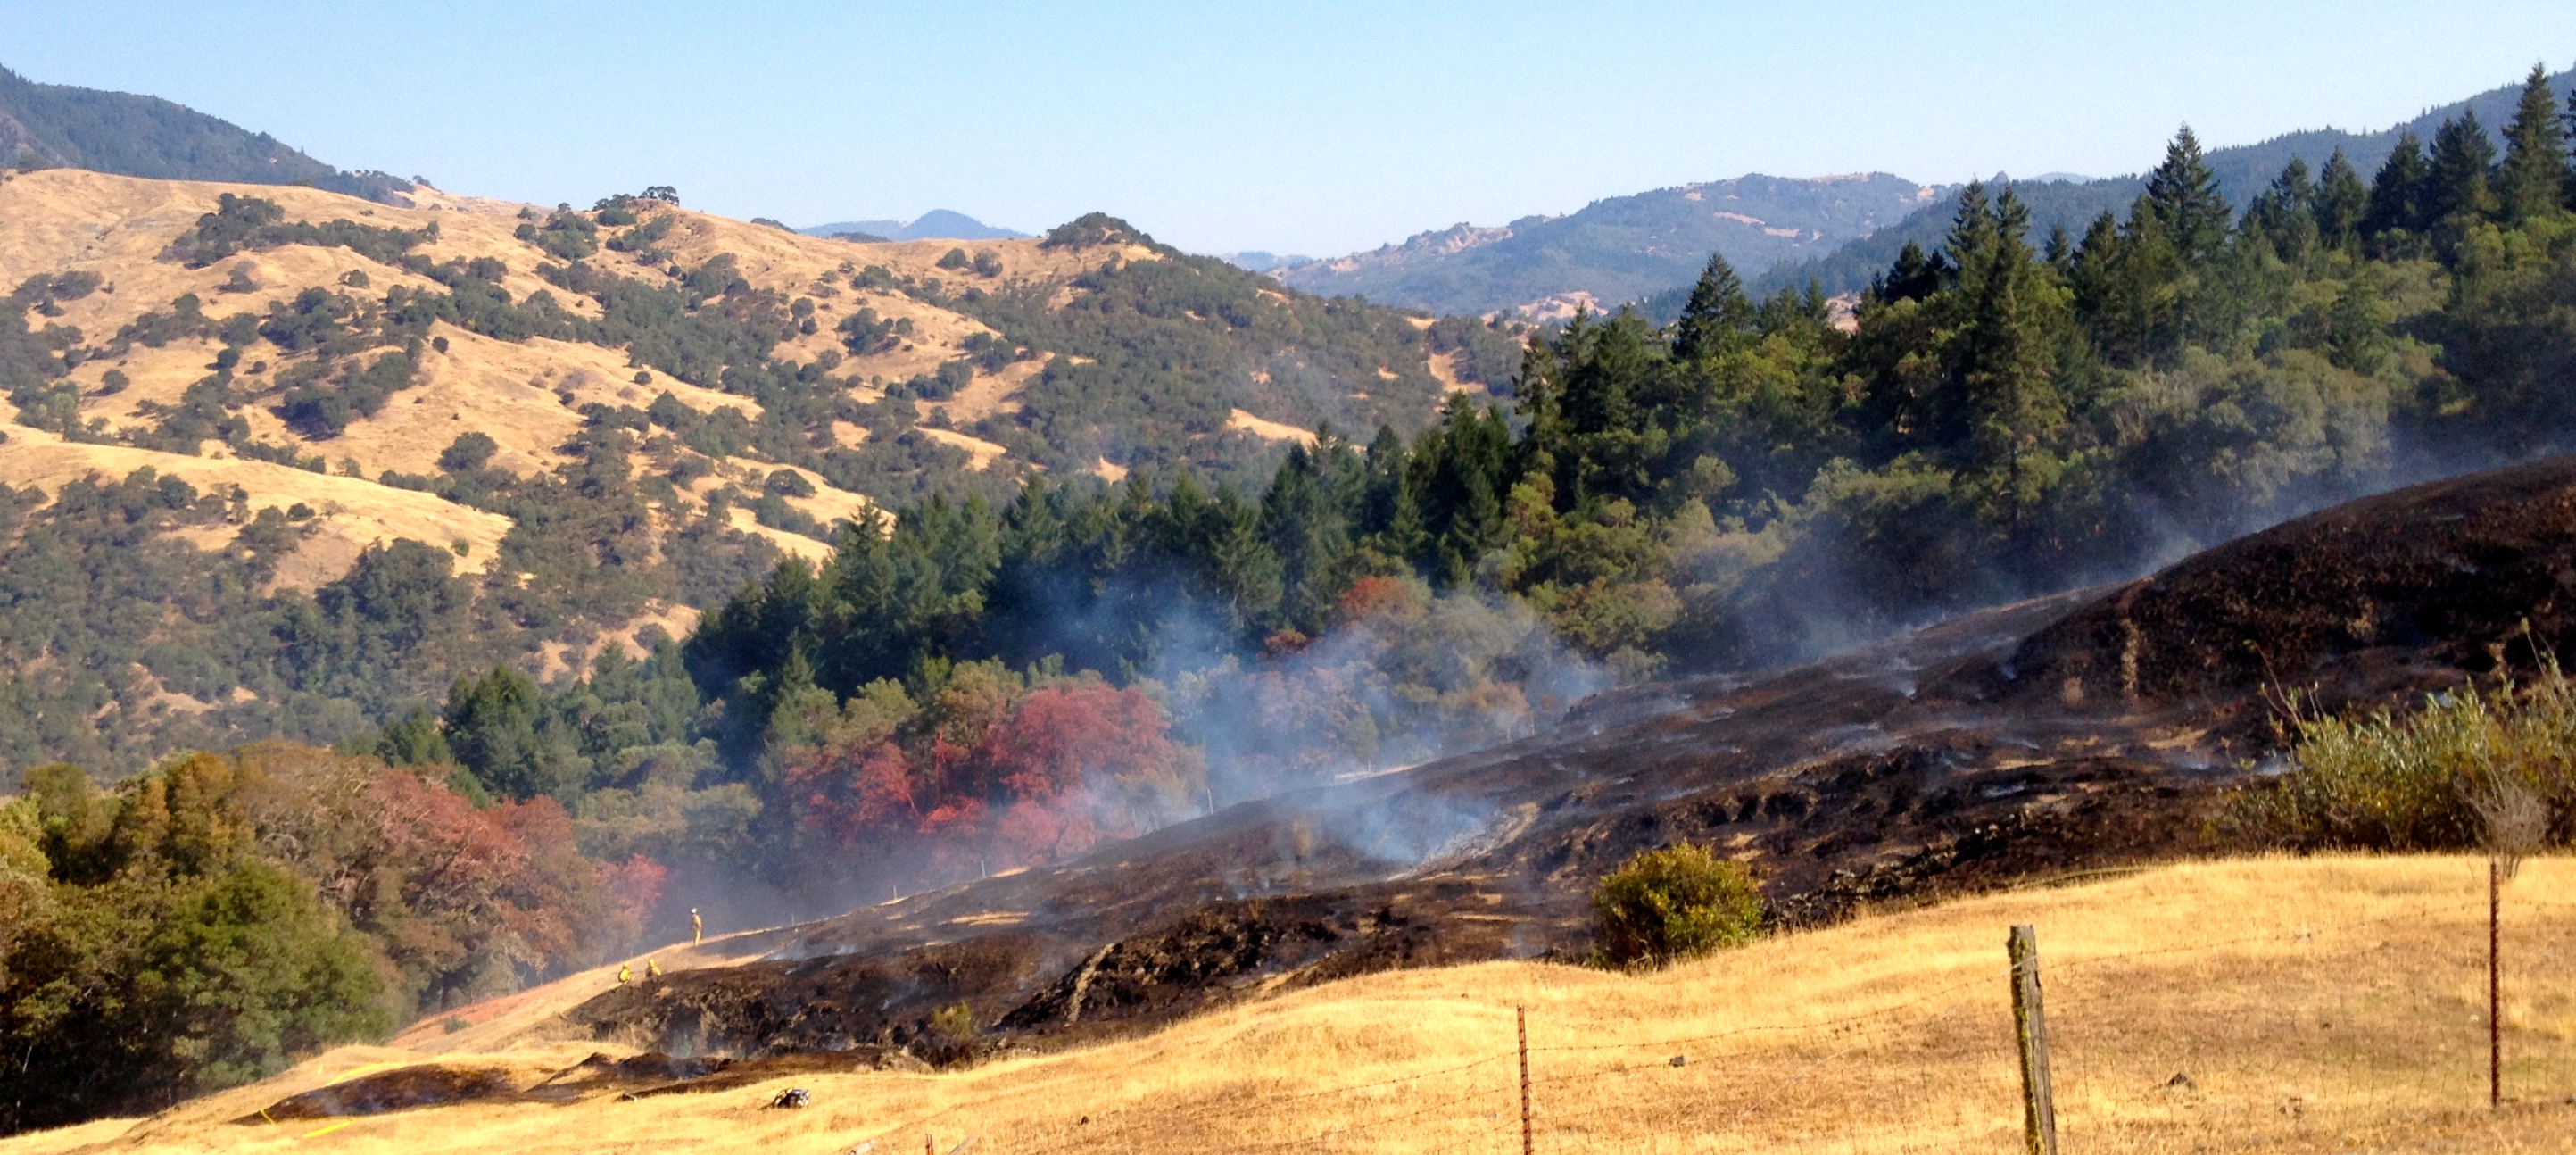 [UPDATED With More Photos] Vegetation Fire Near Alderpoint